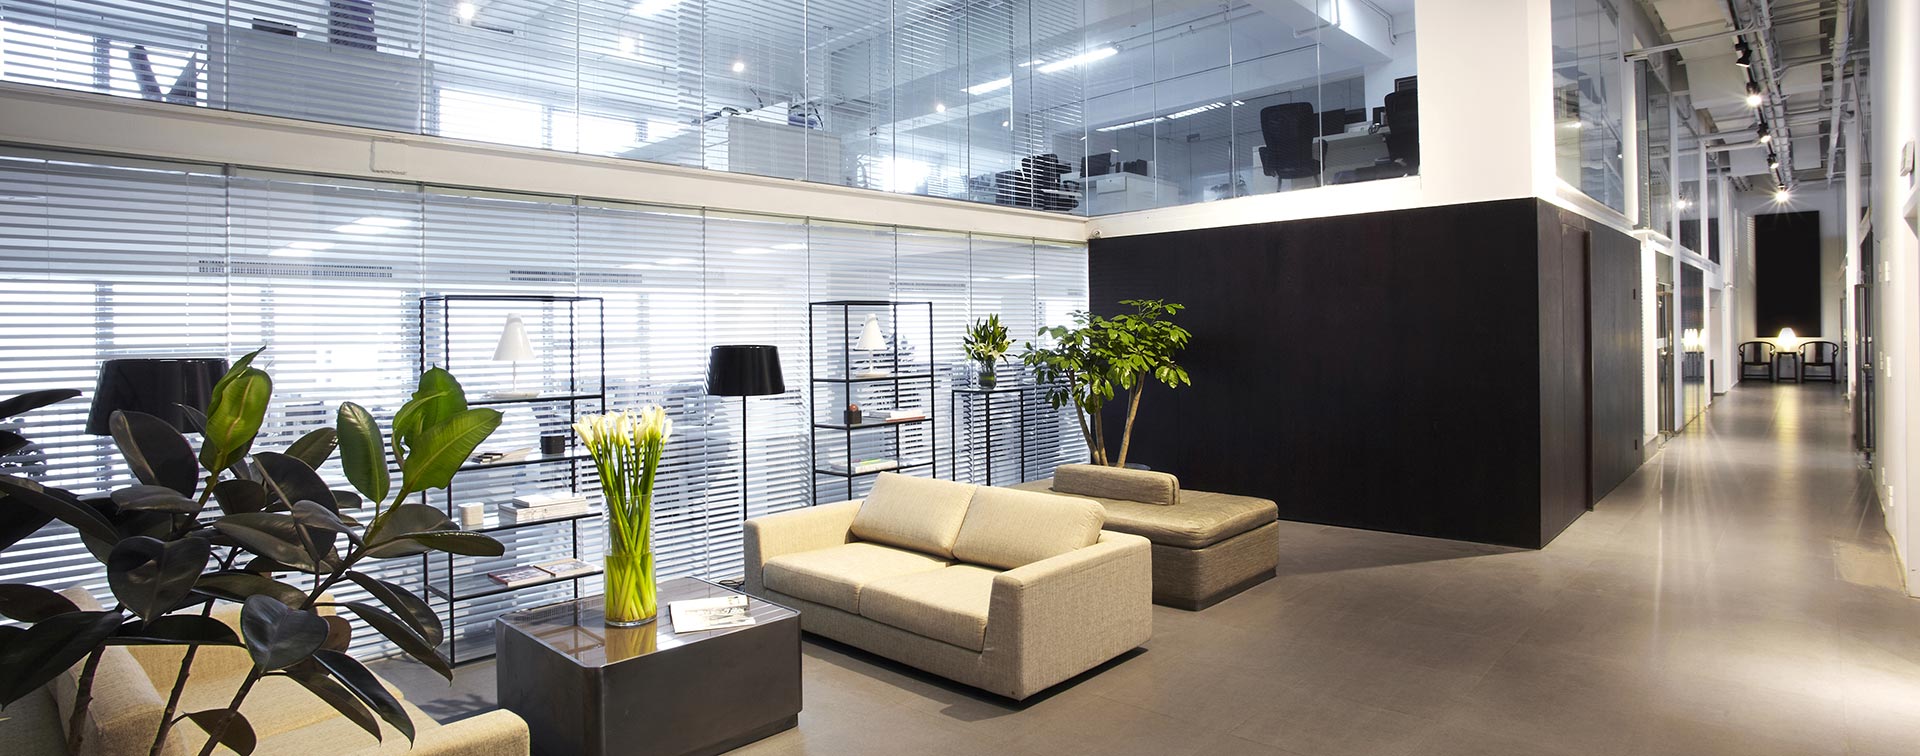 Modern office lounge area with sofas and plants among glass infrastructure.